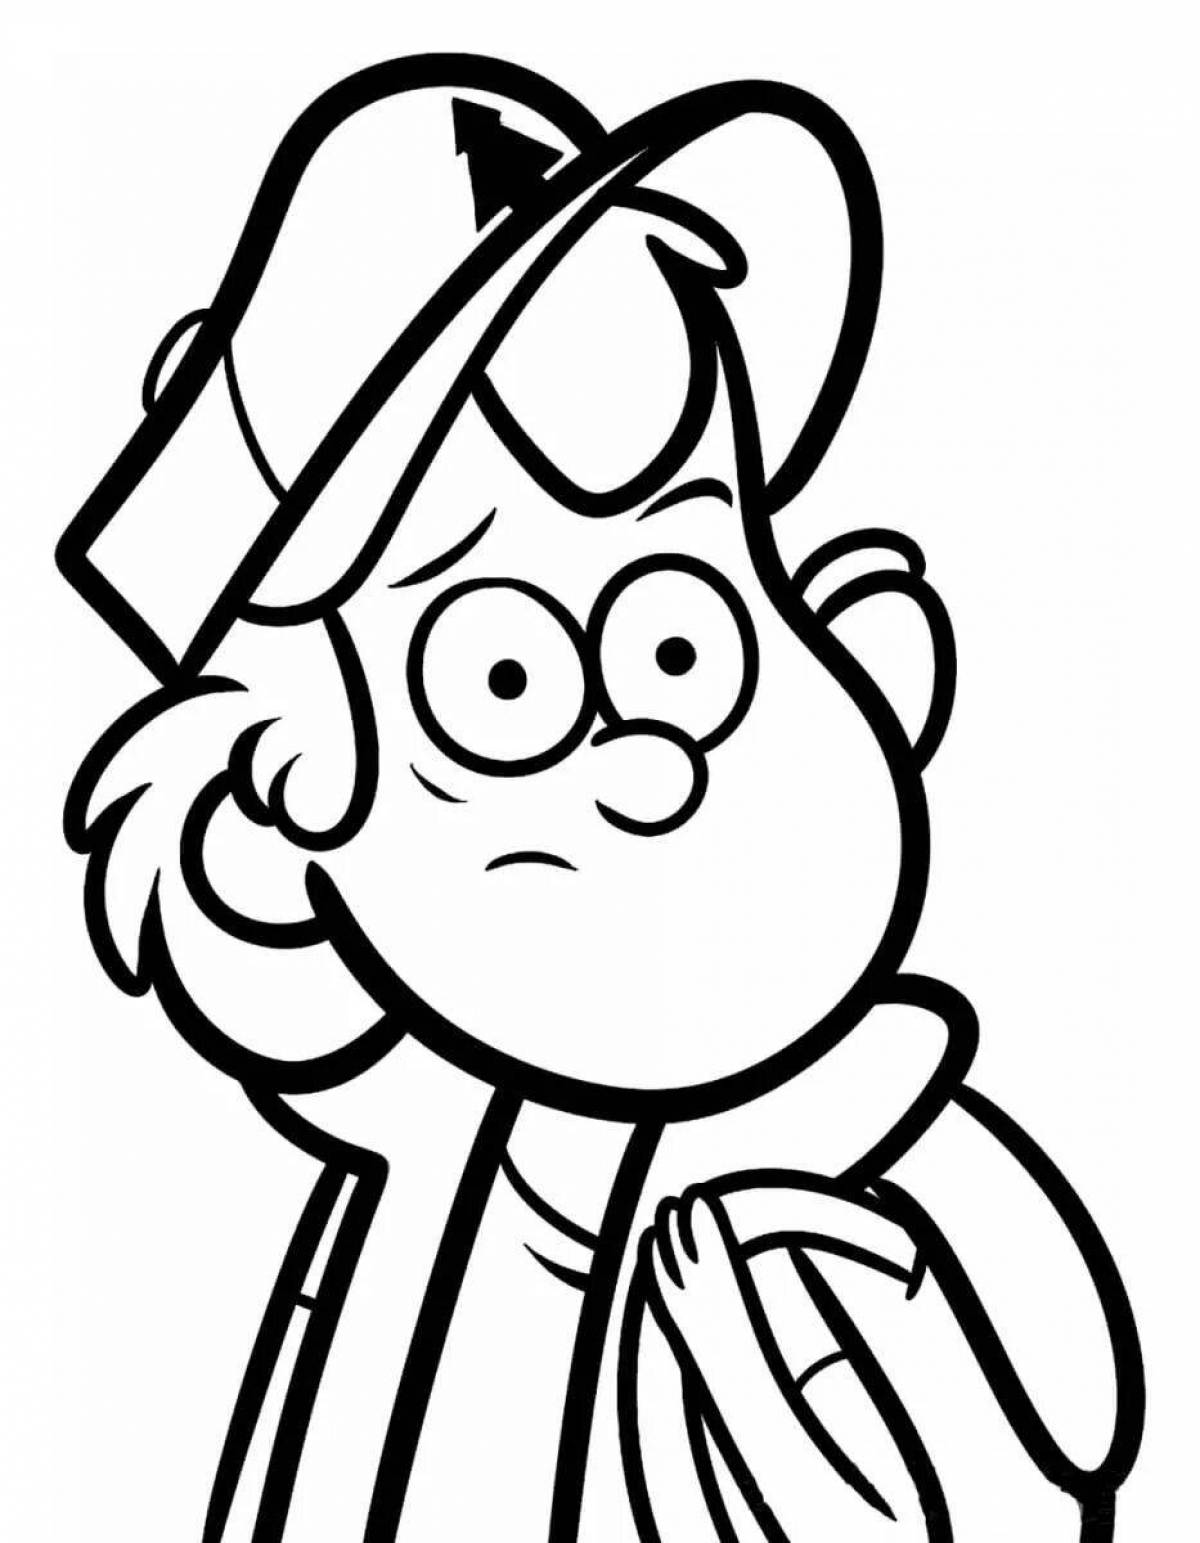 Radiant dipper pines coloring page